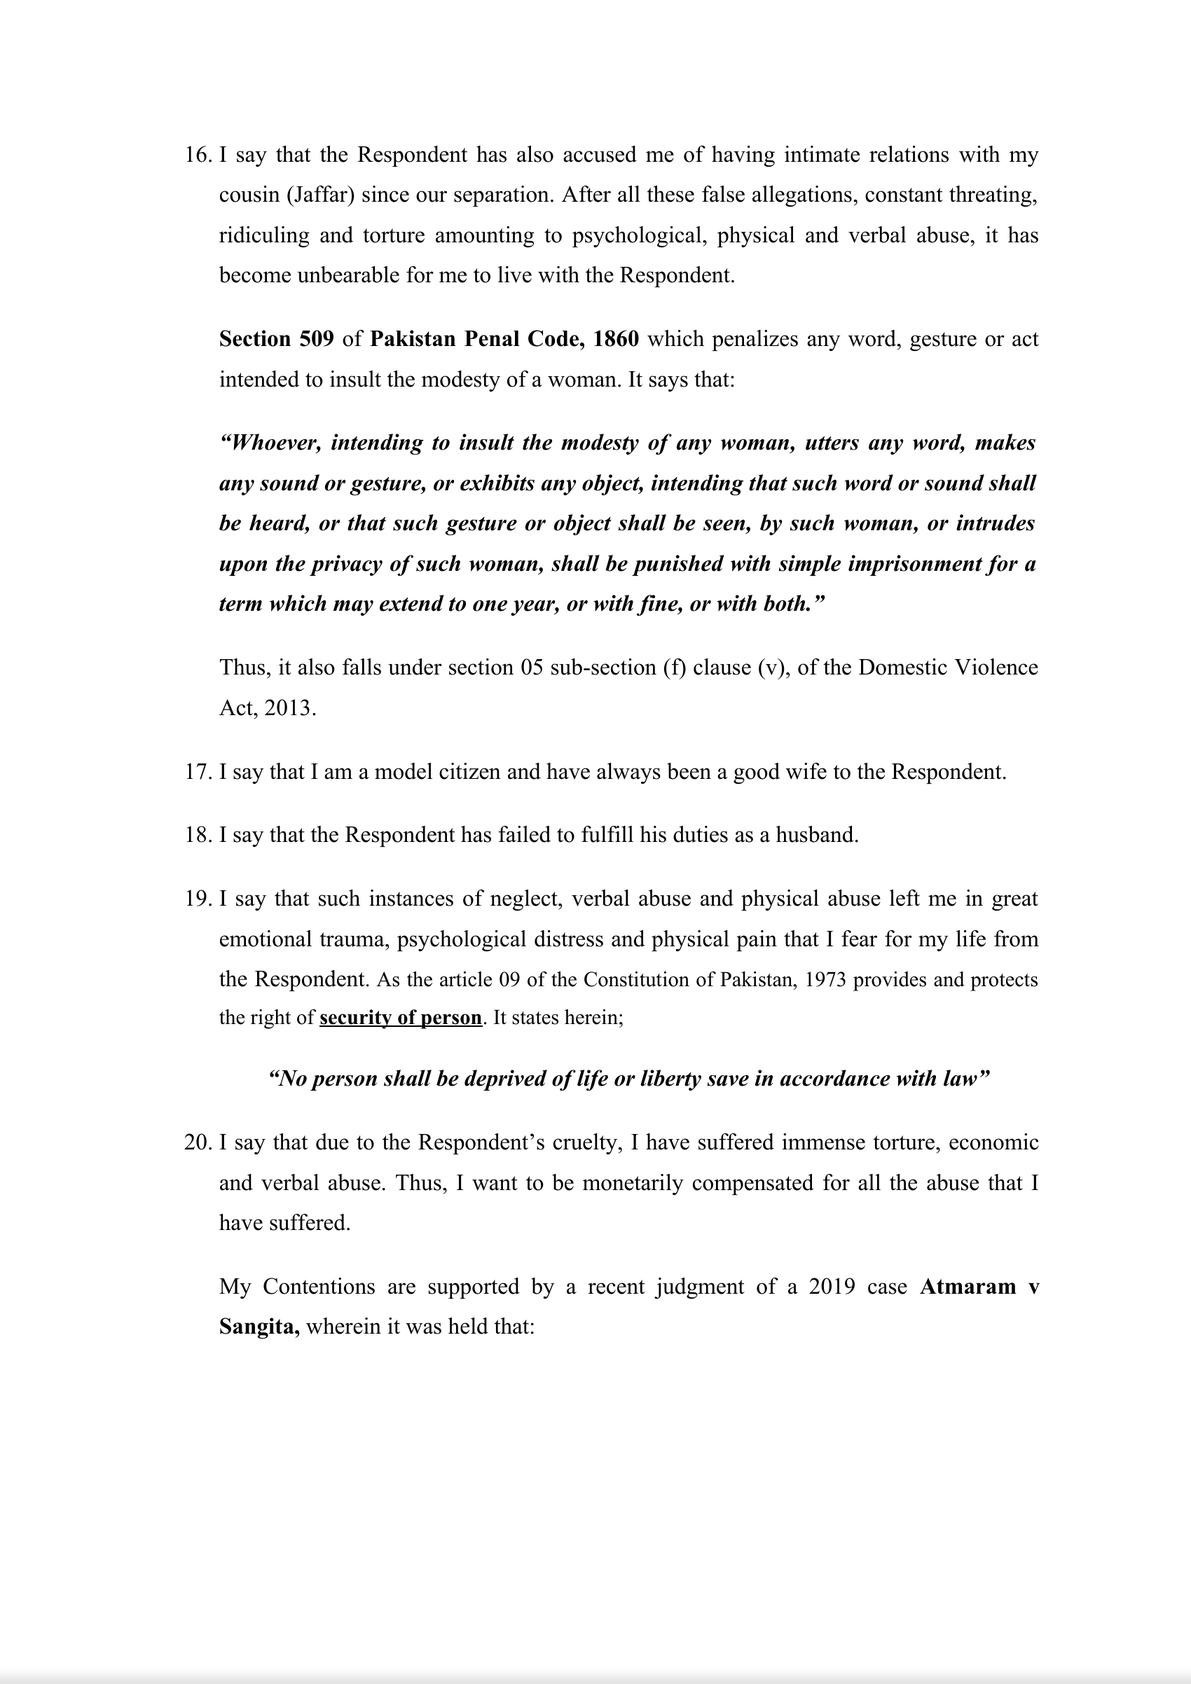 APPLICATION U/S 12 OF THE SINDH DOMESTIC VIOLENCE (PREVENTION & PROTECTION) ACT, 2013-4